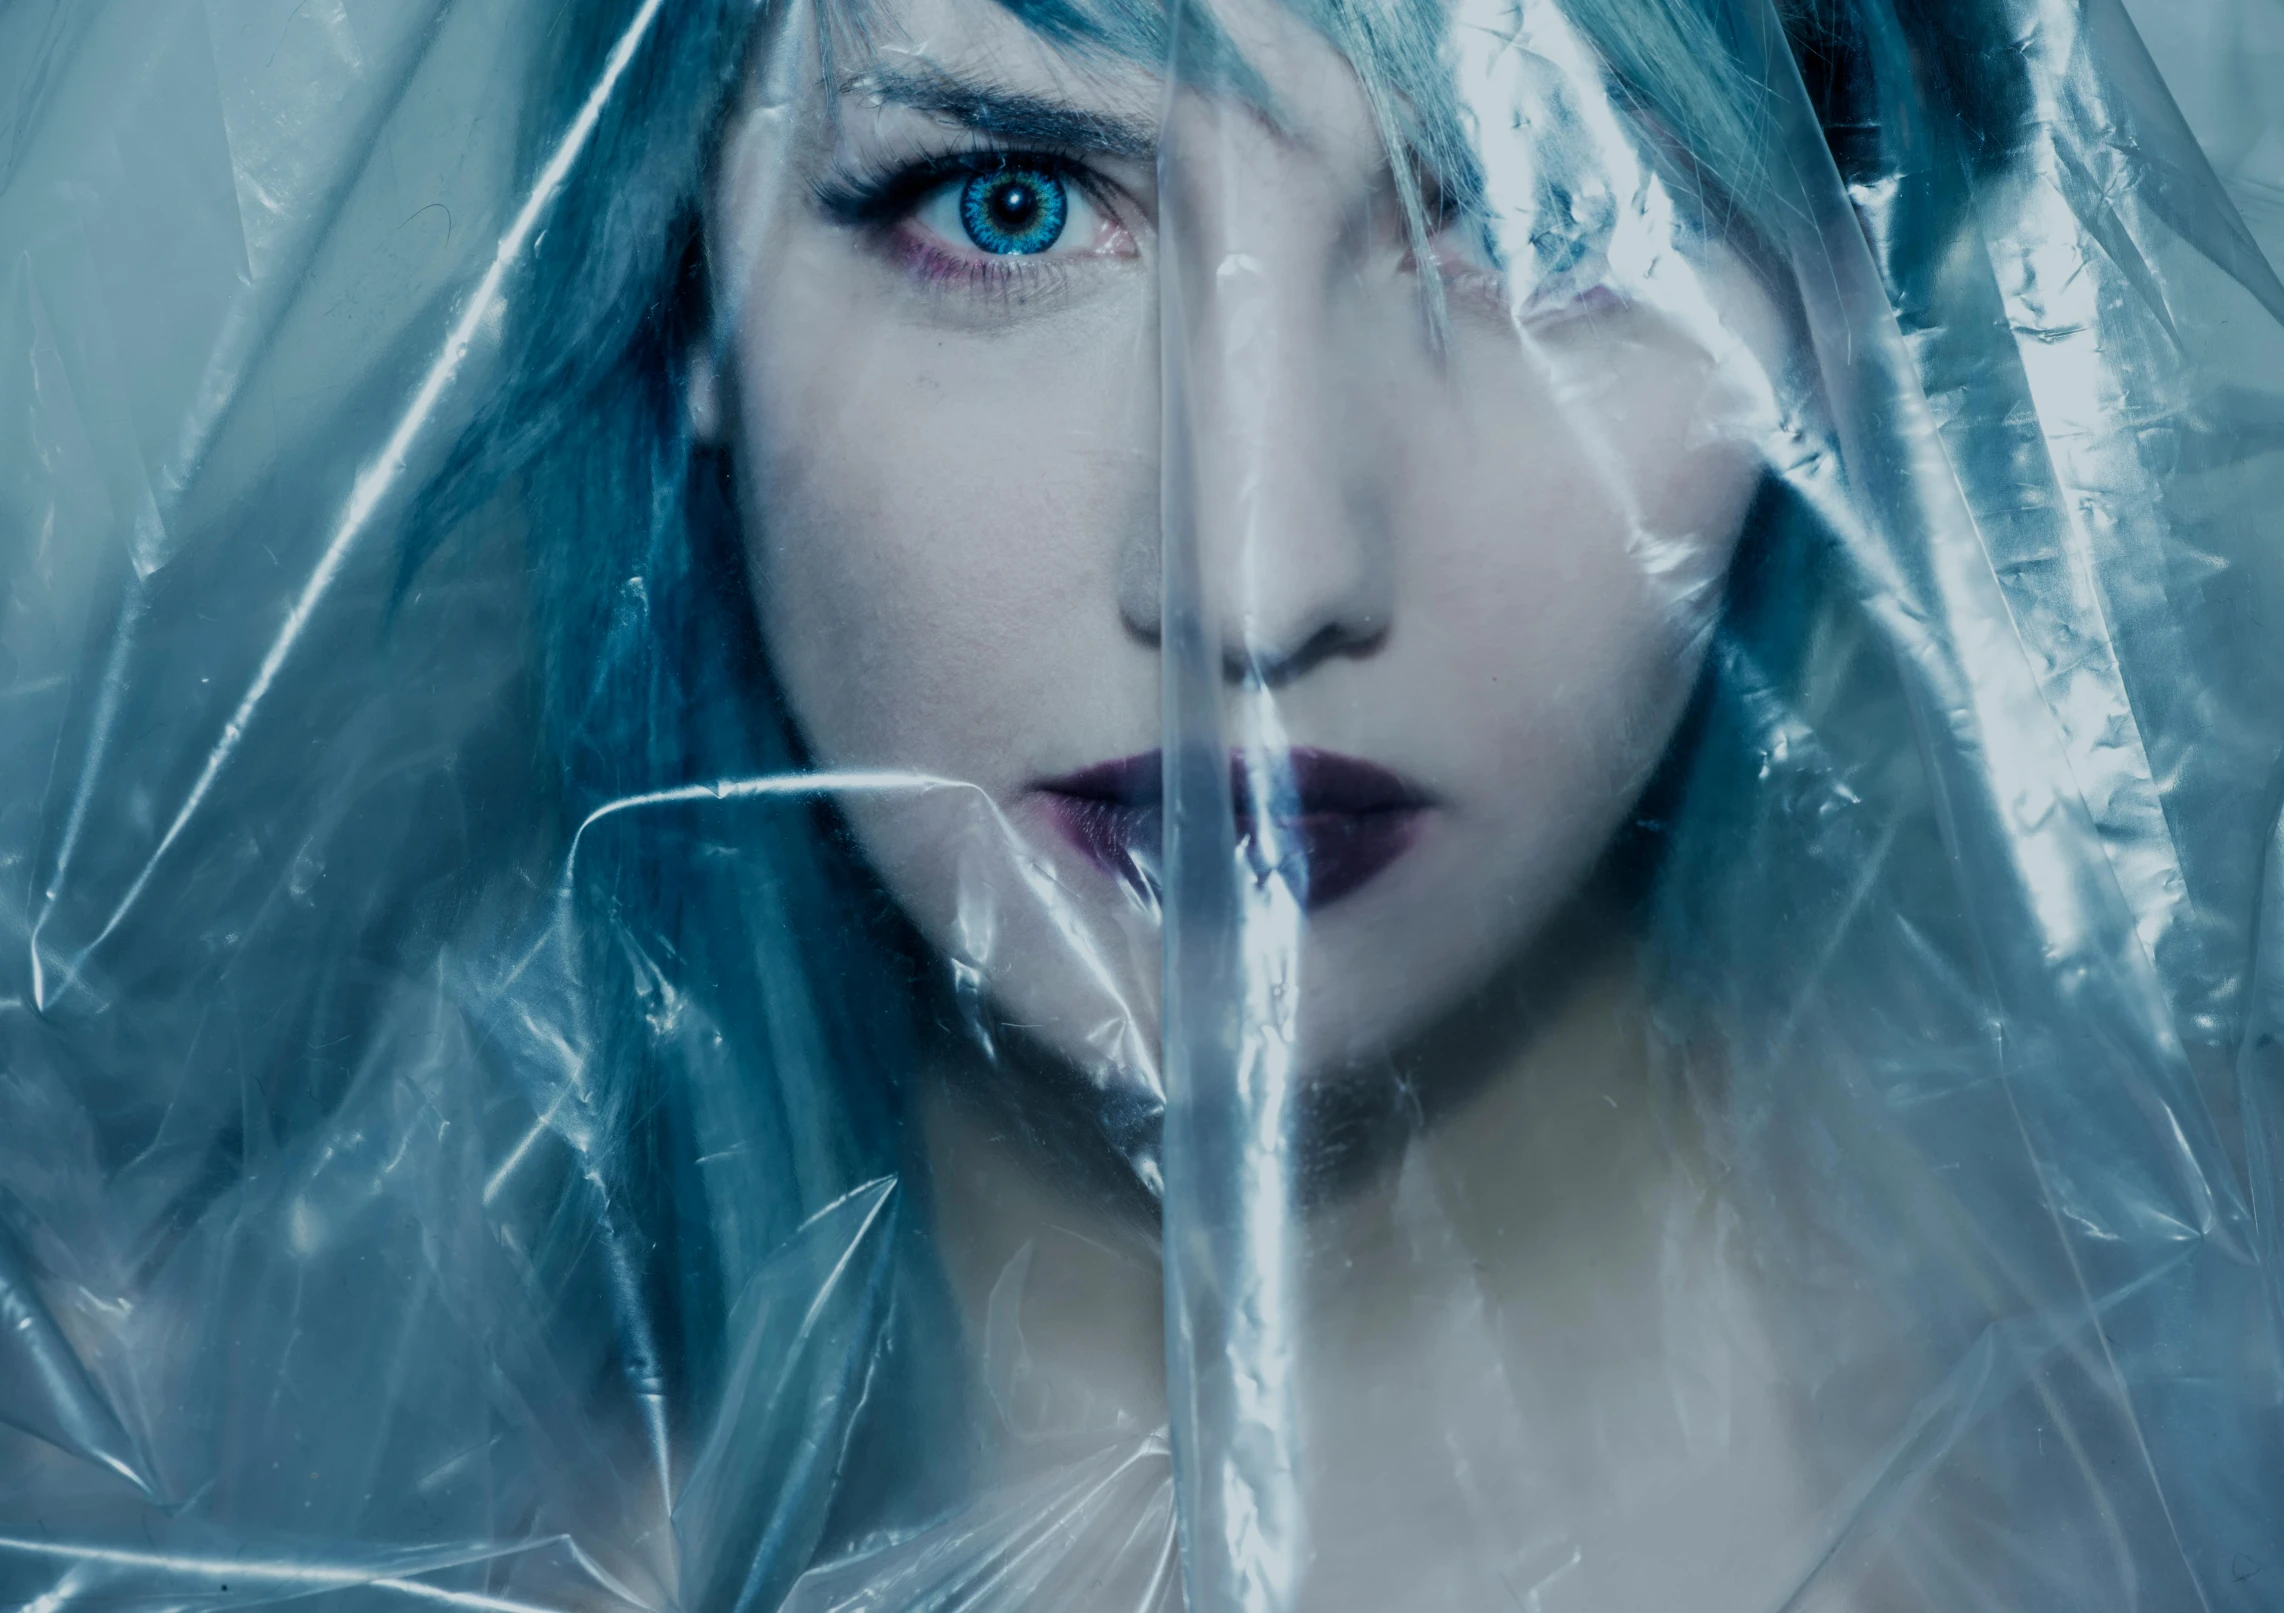 a close up of a person with blue hair, an album cover, inspired by Elsa Bleda, deviantart, hyperrealism, wearing a plastic garbage bag, blade runner film style, annasophia robb as link, entrapped in ice